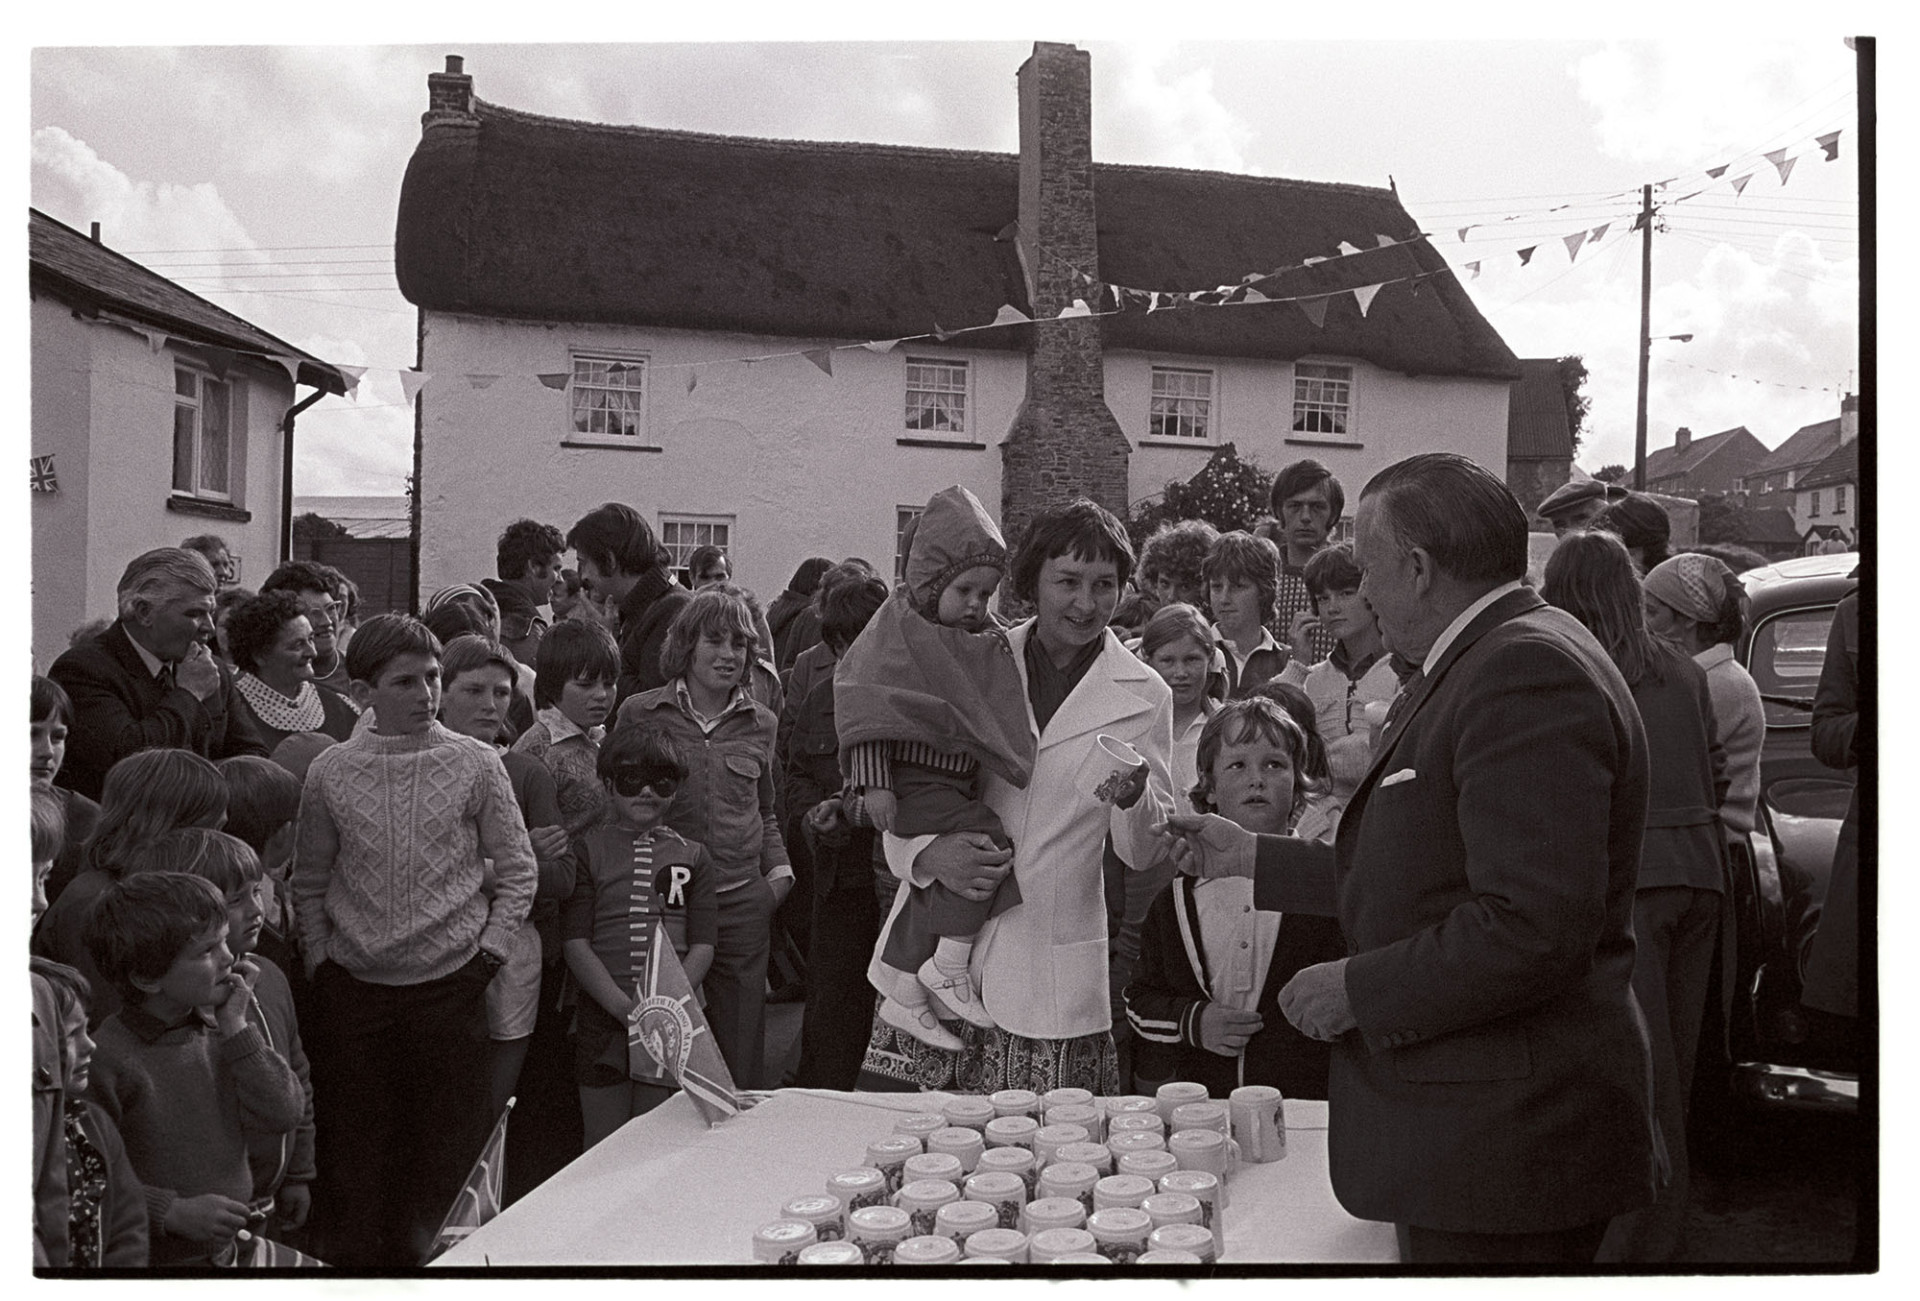 Presentation of Jubilee mugs, crowd in front of mugs set out on table, man presenting them.
[A man presenting Jubilee mugs, to celebrate the Silver Jubilee of Queen Elizabeth II, to a crowd of children at Atherington. The street is decorated with bunting and a thatched cottage can be seen in the background.]